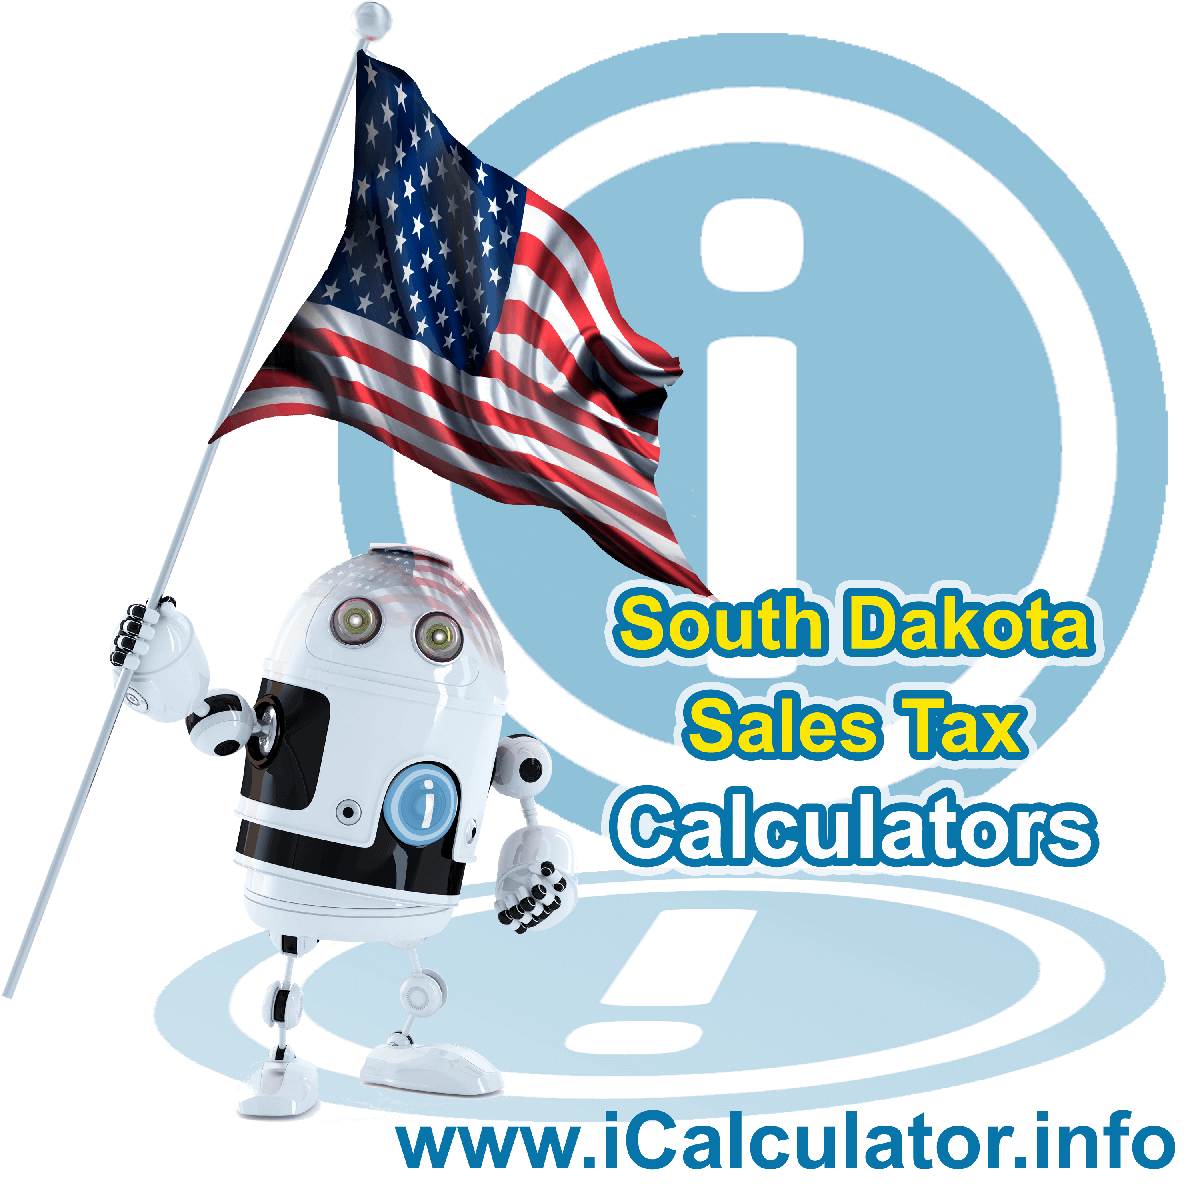 Baltic Sales Rates: This image illustrates a calculator robot calculating Baltic sales tax manually using the Baltic Sales Tax Formula. You can use this information to calculate Baltic Sales Tax manually or use the Baltic Sales Tax Calculator to calculate sales tax online.